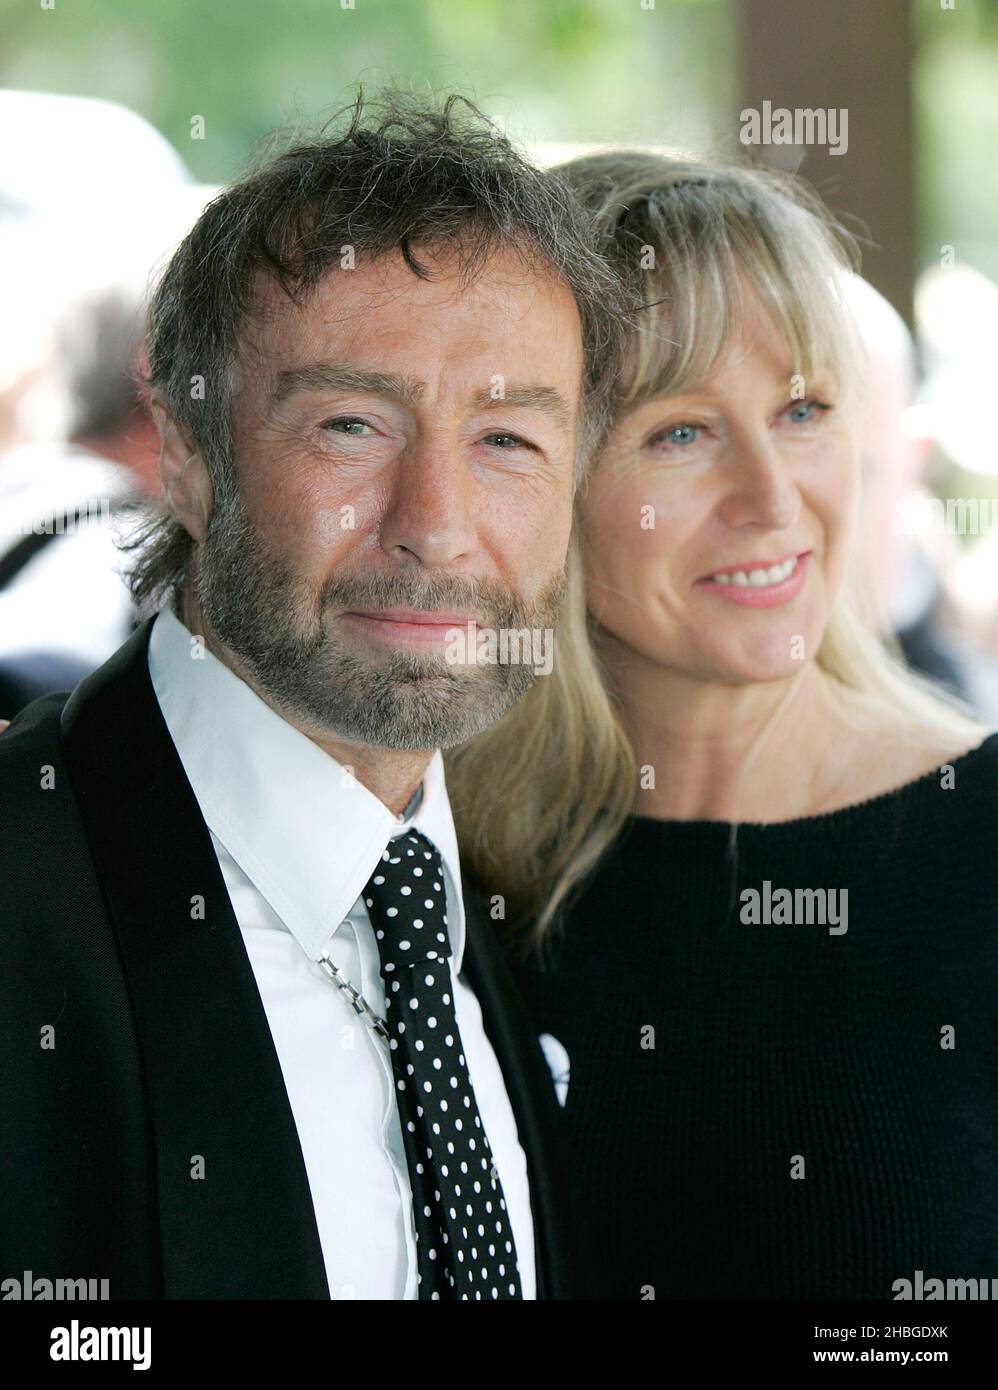 Paul Rodgers arrives at the Ivor Novello Awards,Grosvenor House Hotel,London on May 19,2011. Stock Photo